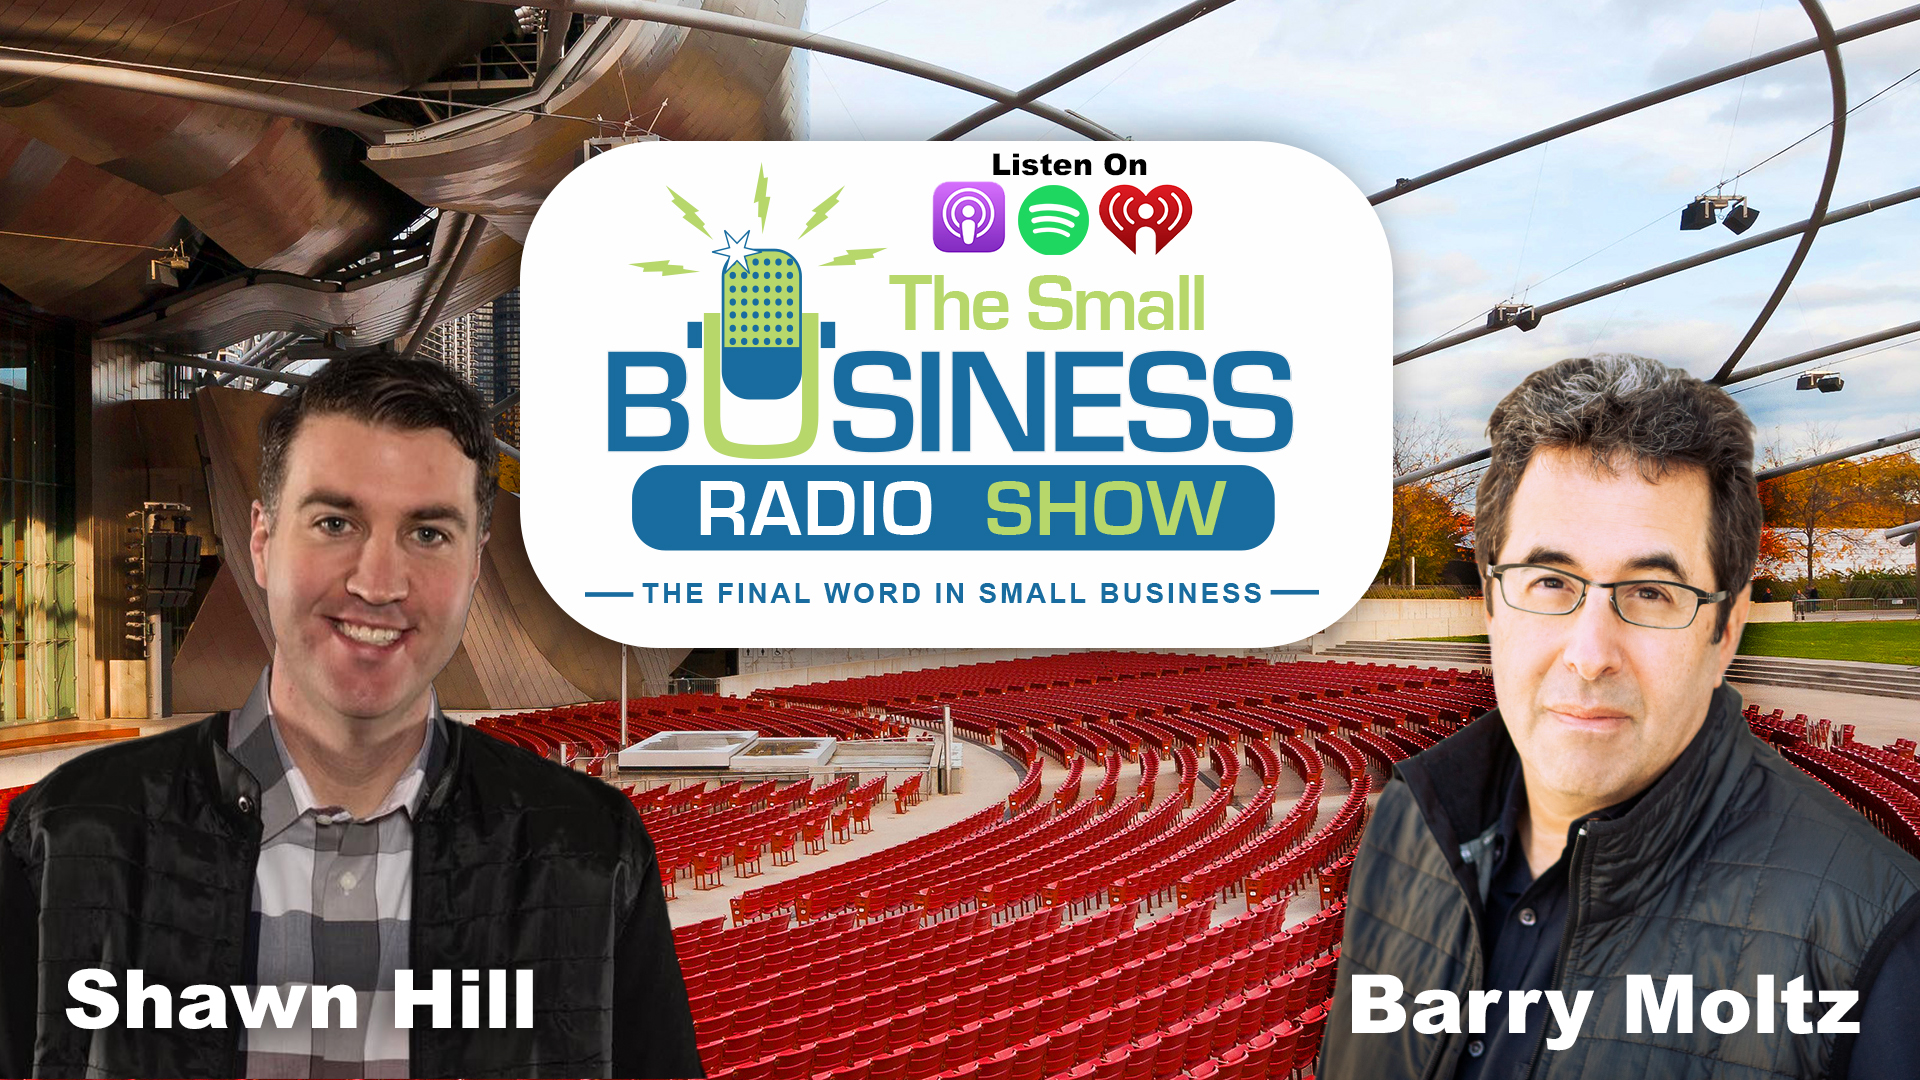 Shawn Hill on The Small Business Radio Show social proof